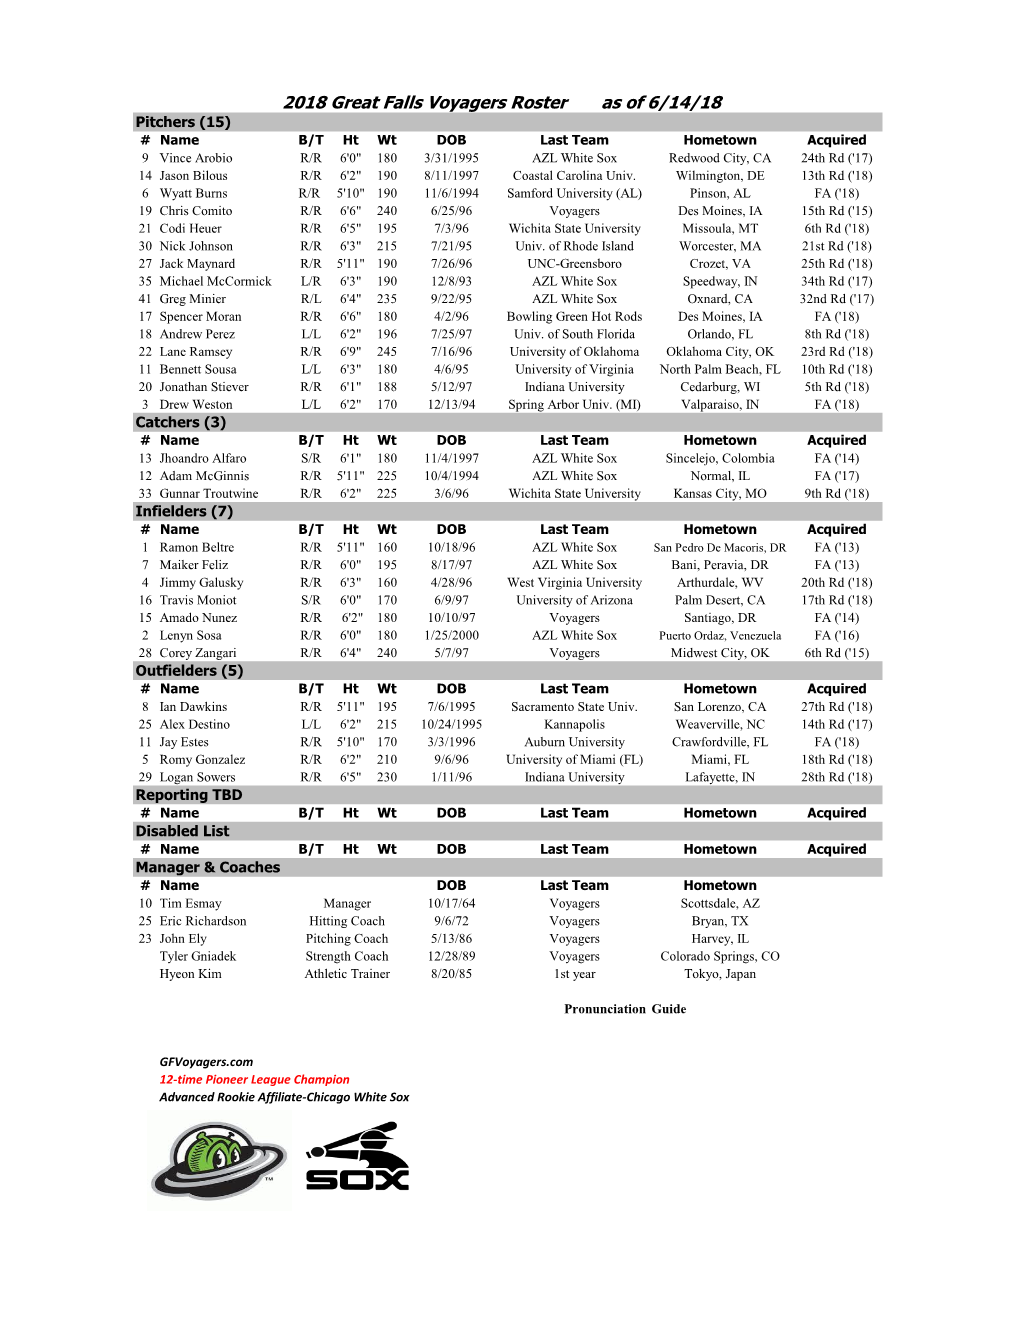 2018 Great Falls Voyagers Roster As of 6/14/18